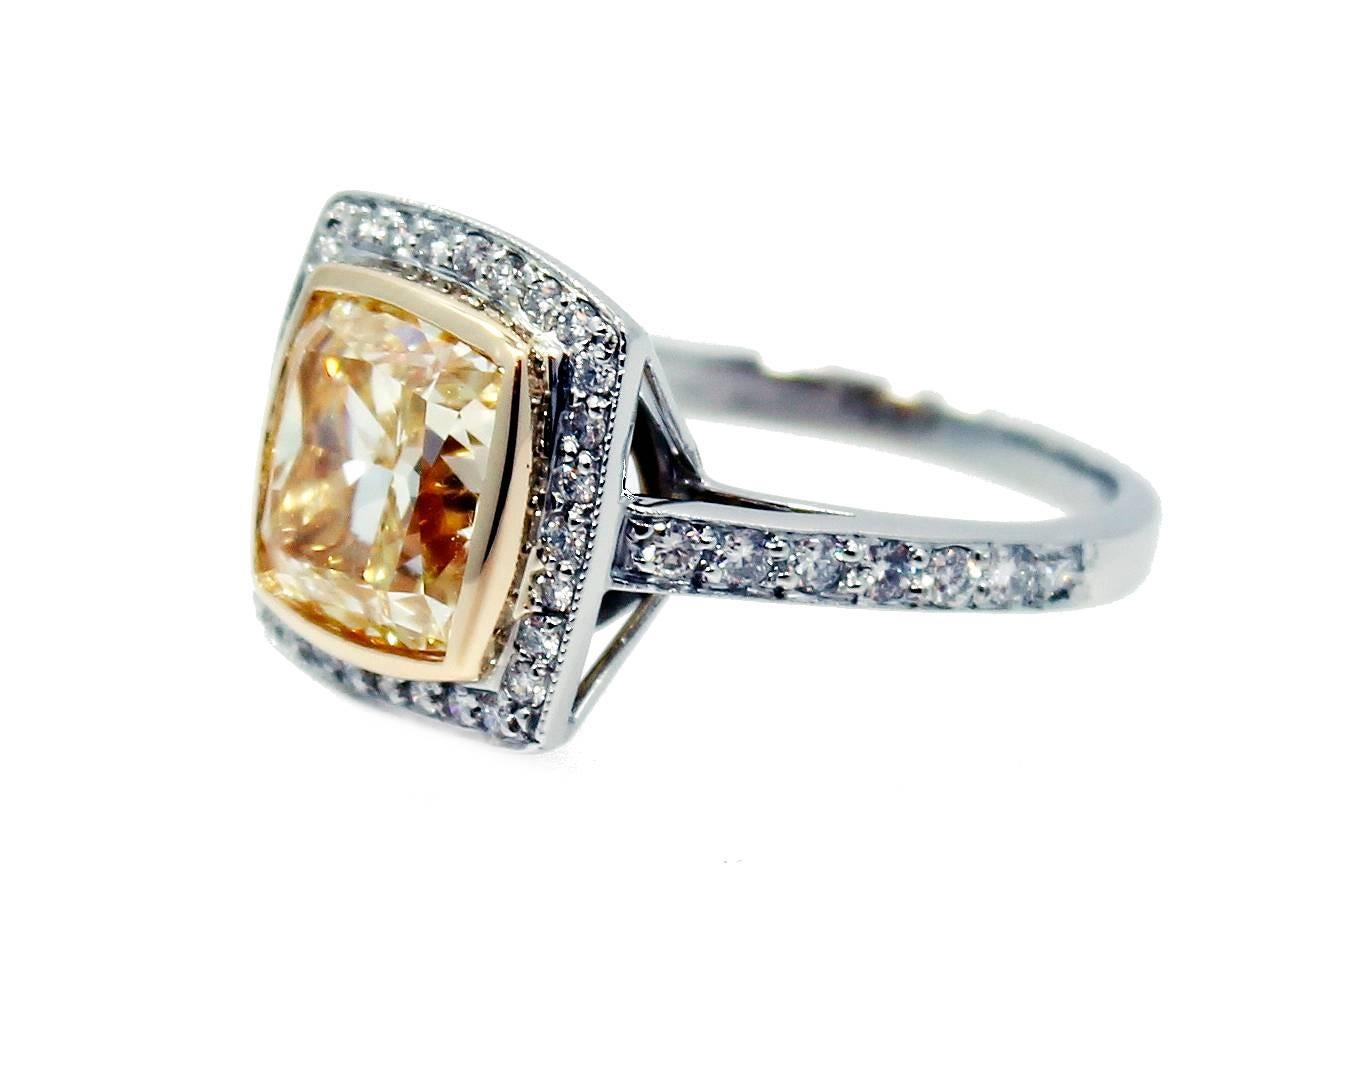 5.55 Carat Fancy Light Yellow Radiant Diamond Engagement Ring In New Condition For Sale In Naples, FL